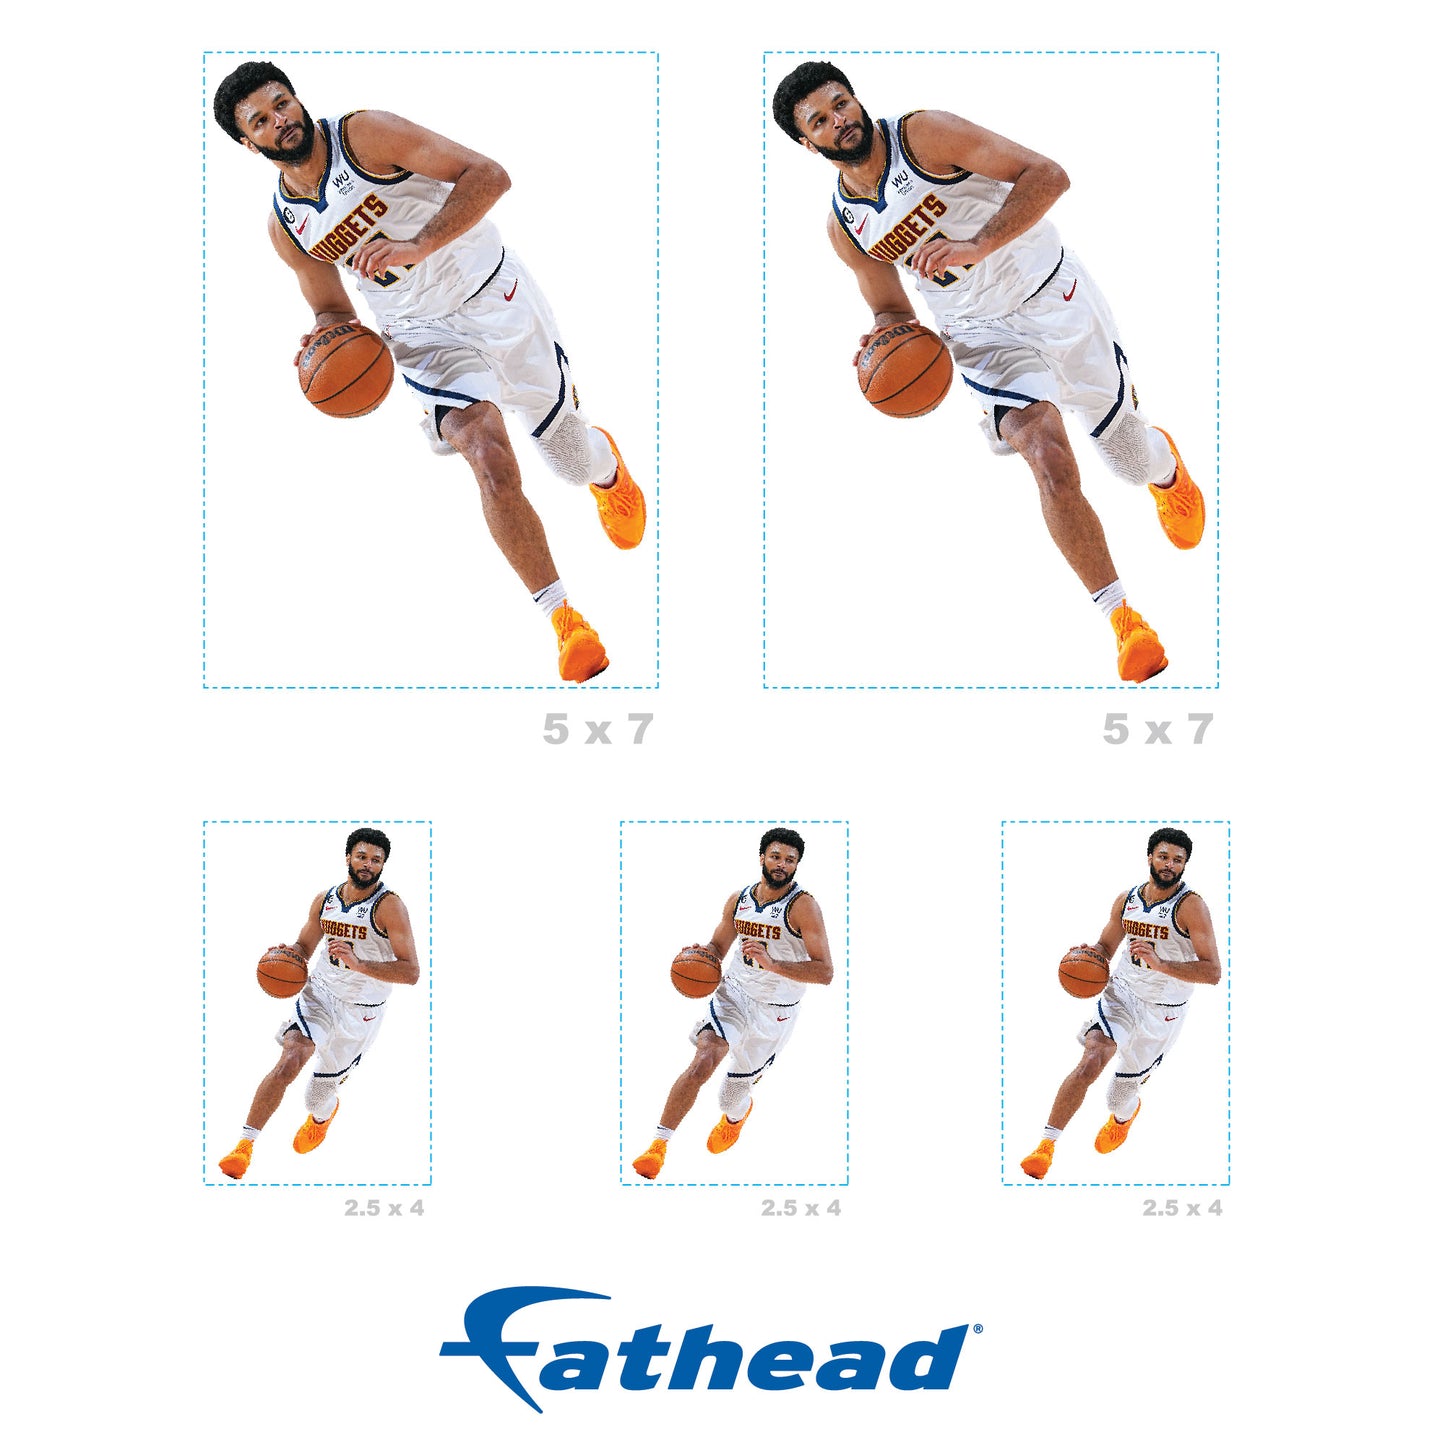 Denver Nuggets: Jamal Murray Minis - Officially Licensed NBA Removable Adhesive Decal